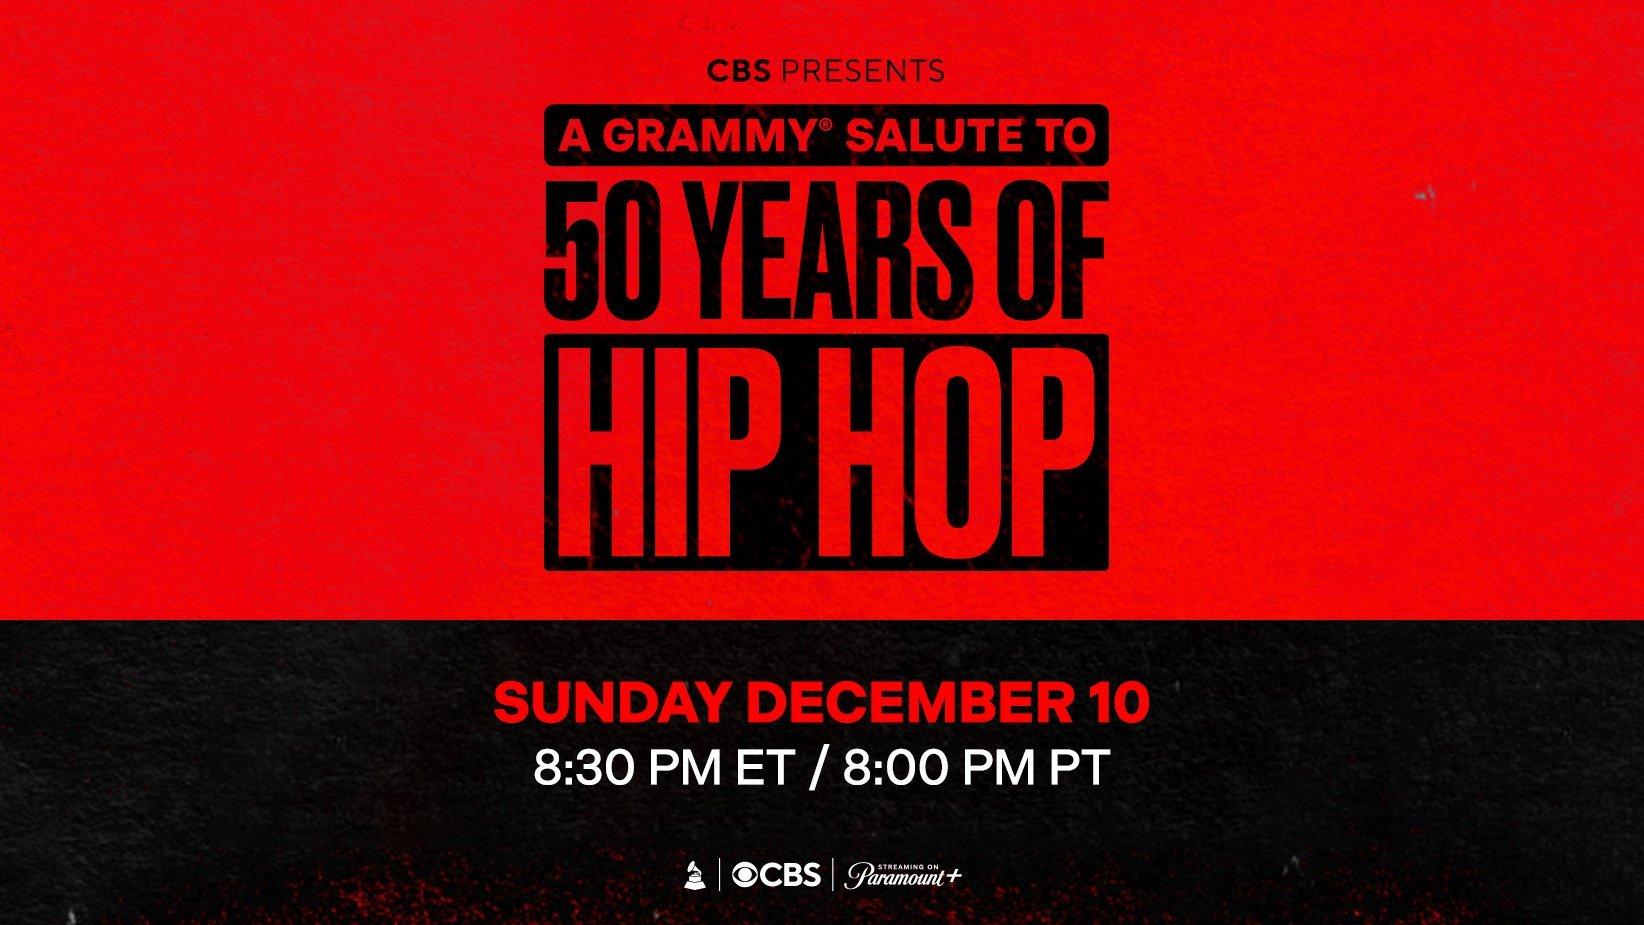 "A GRAMMY Salute To 50 Years Of Hip-Hop” premieres Sunday, Dec. 10, at 8:30 p.m. ET/8 p.m. PT, airing on the CBS Television Network and streaming live and on demand on Paramount+.